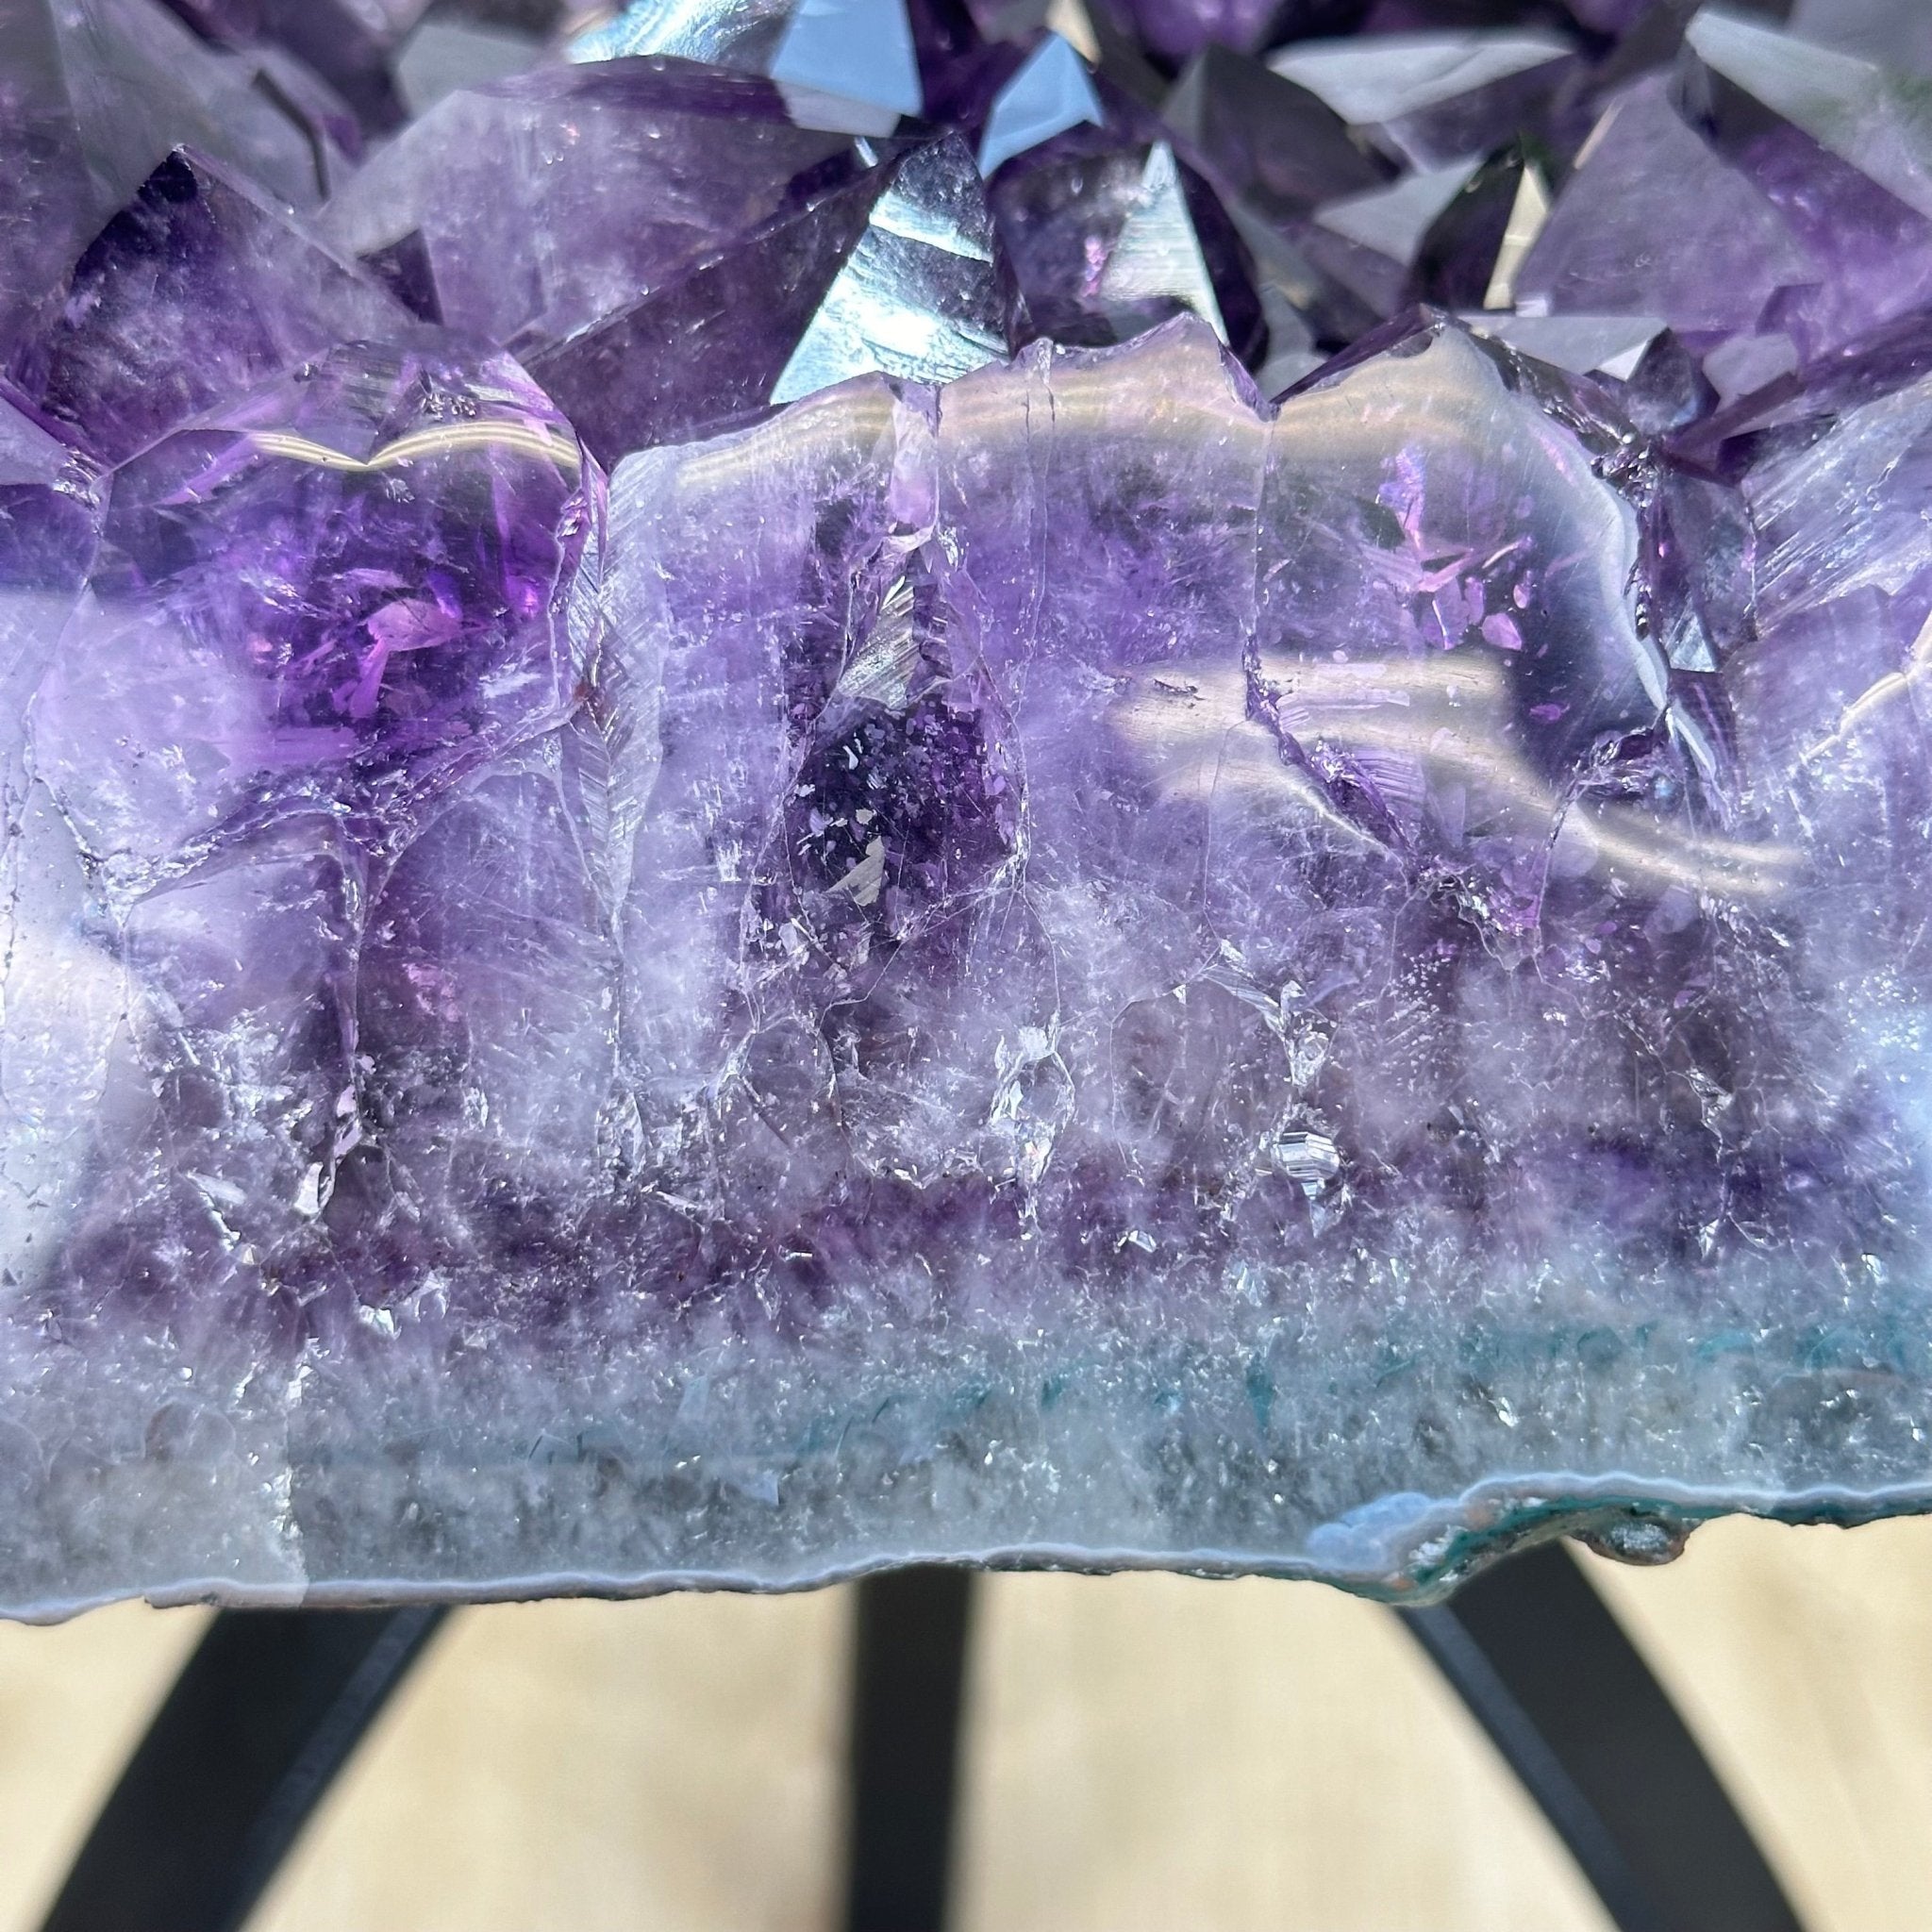 Super Quality Amethyst Geode Side Table, 38.6 lbs, 21.75" Tall #1384-0035 - Brazil GemsBrazil GemsSuper Quality Amethyst Geode Side Table, 38.6 lbs, 21.75" Tall #1384-0035Tables: Side1384-0035